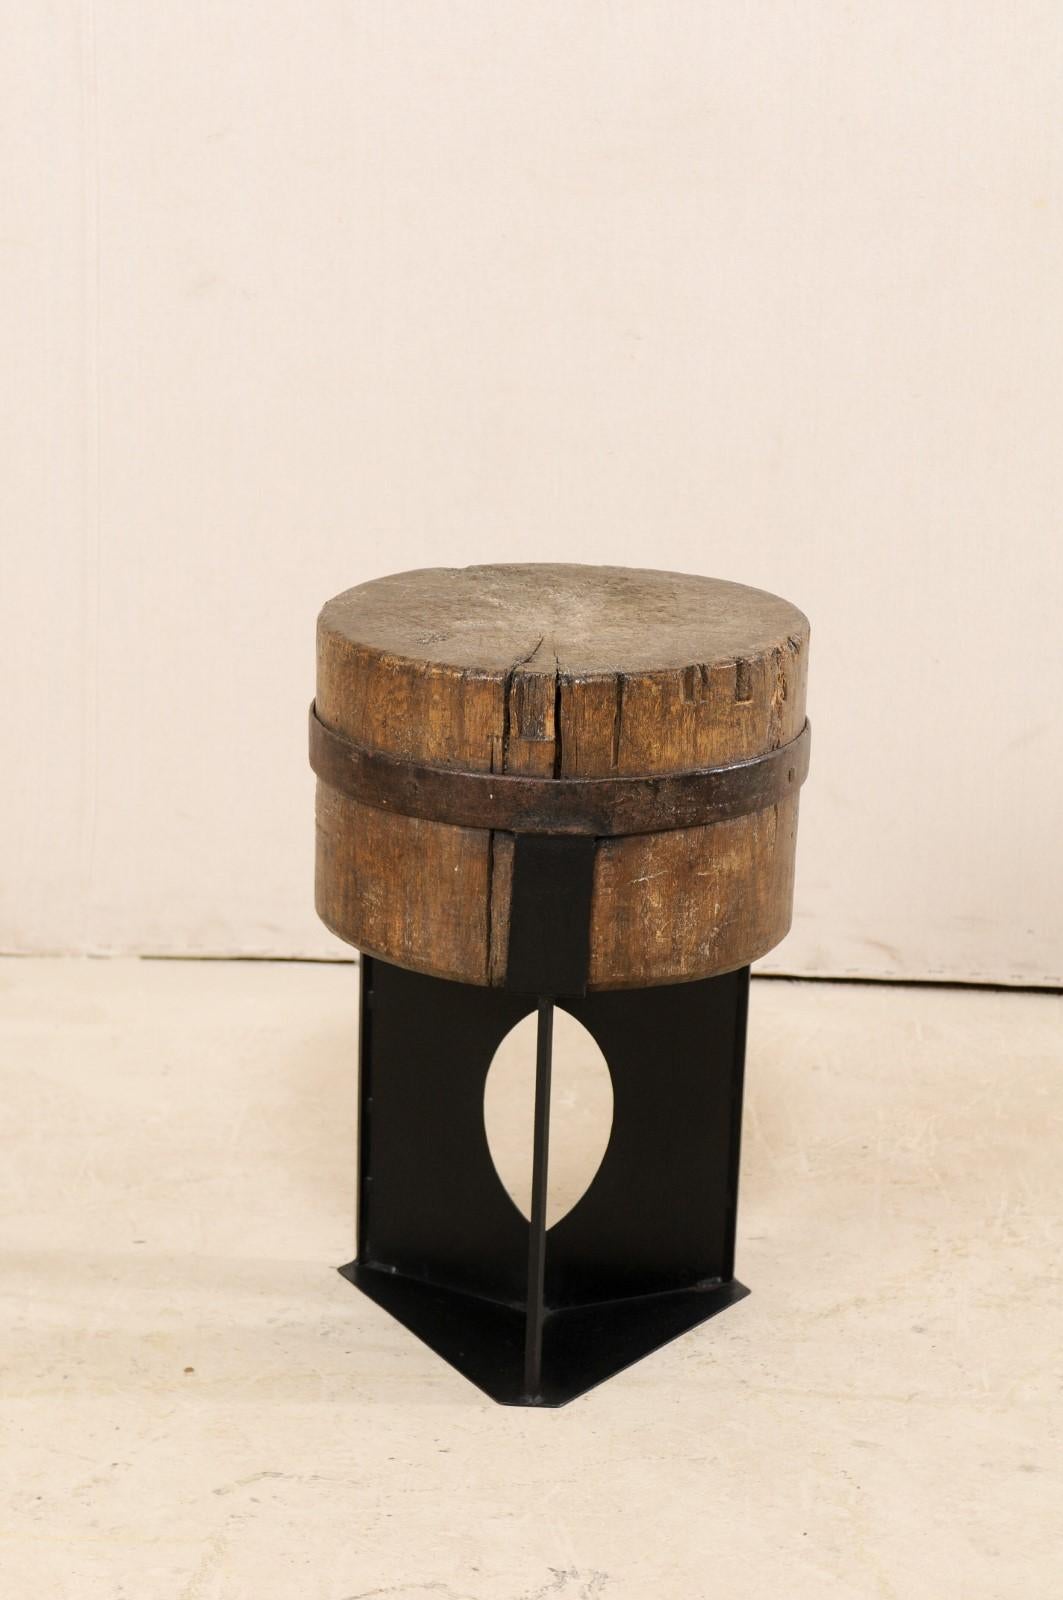 This modern-designed side table has been custom fashioned with a European 19th century chopping block top mounted onto a contemporary black iron base. This unique and one-of-a-kind piece has been created with an intriguing mix of rustic and modern